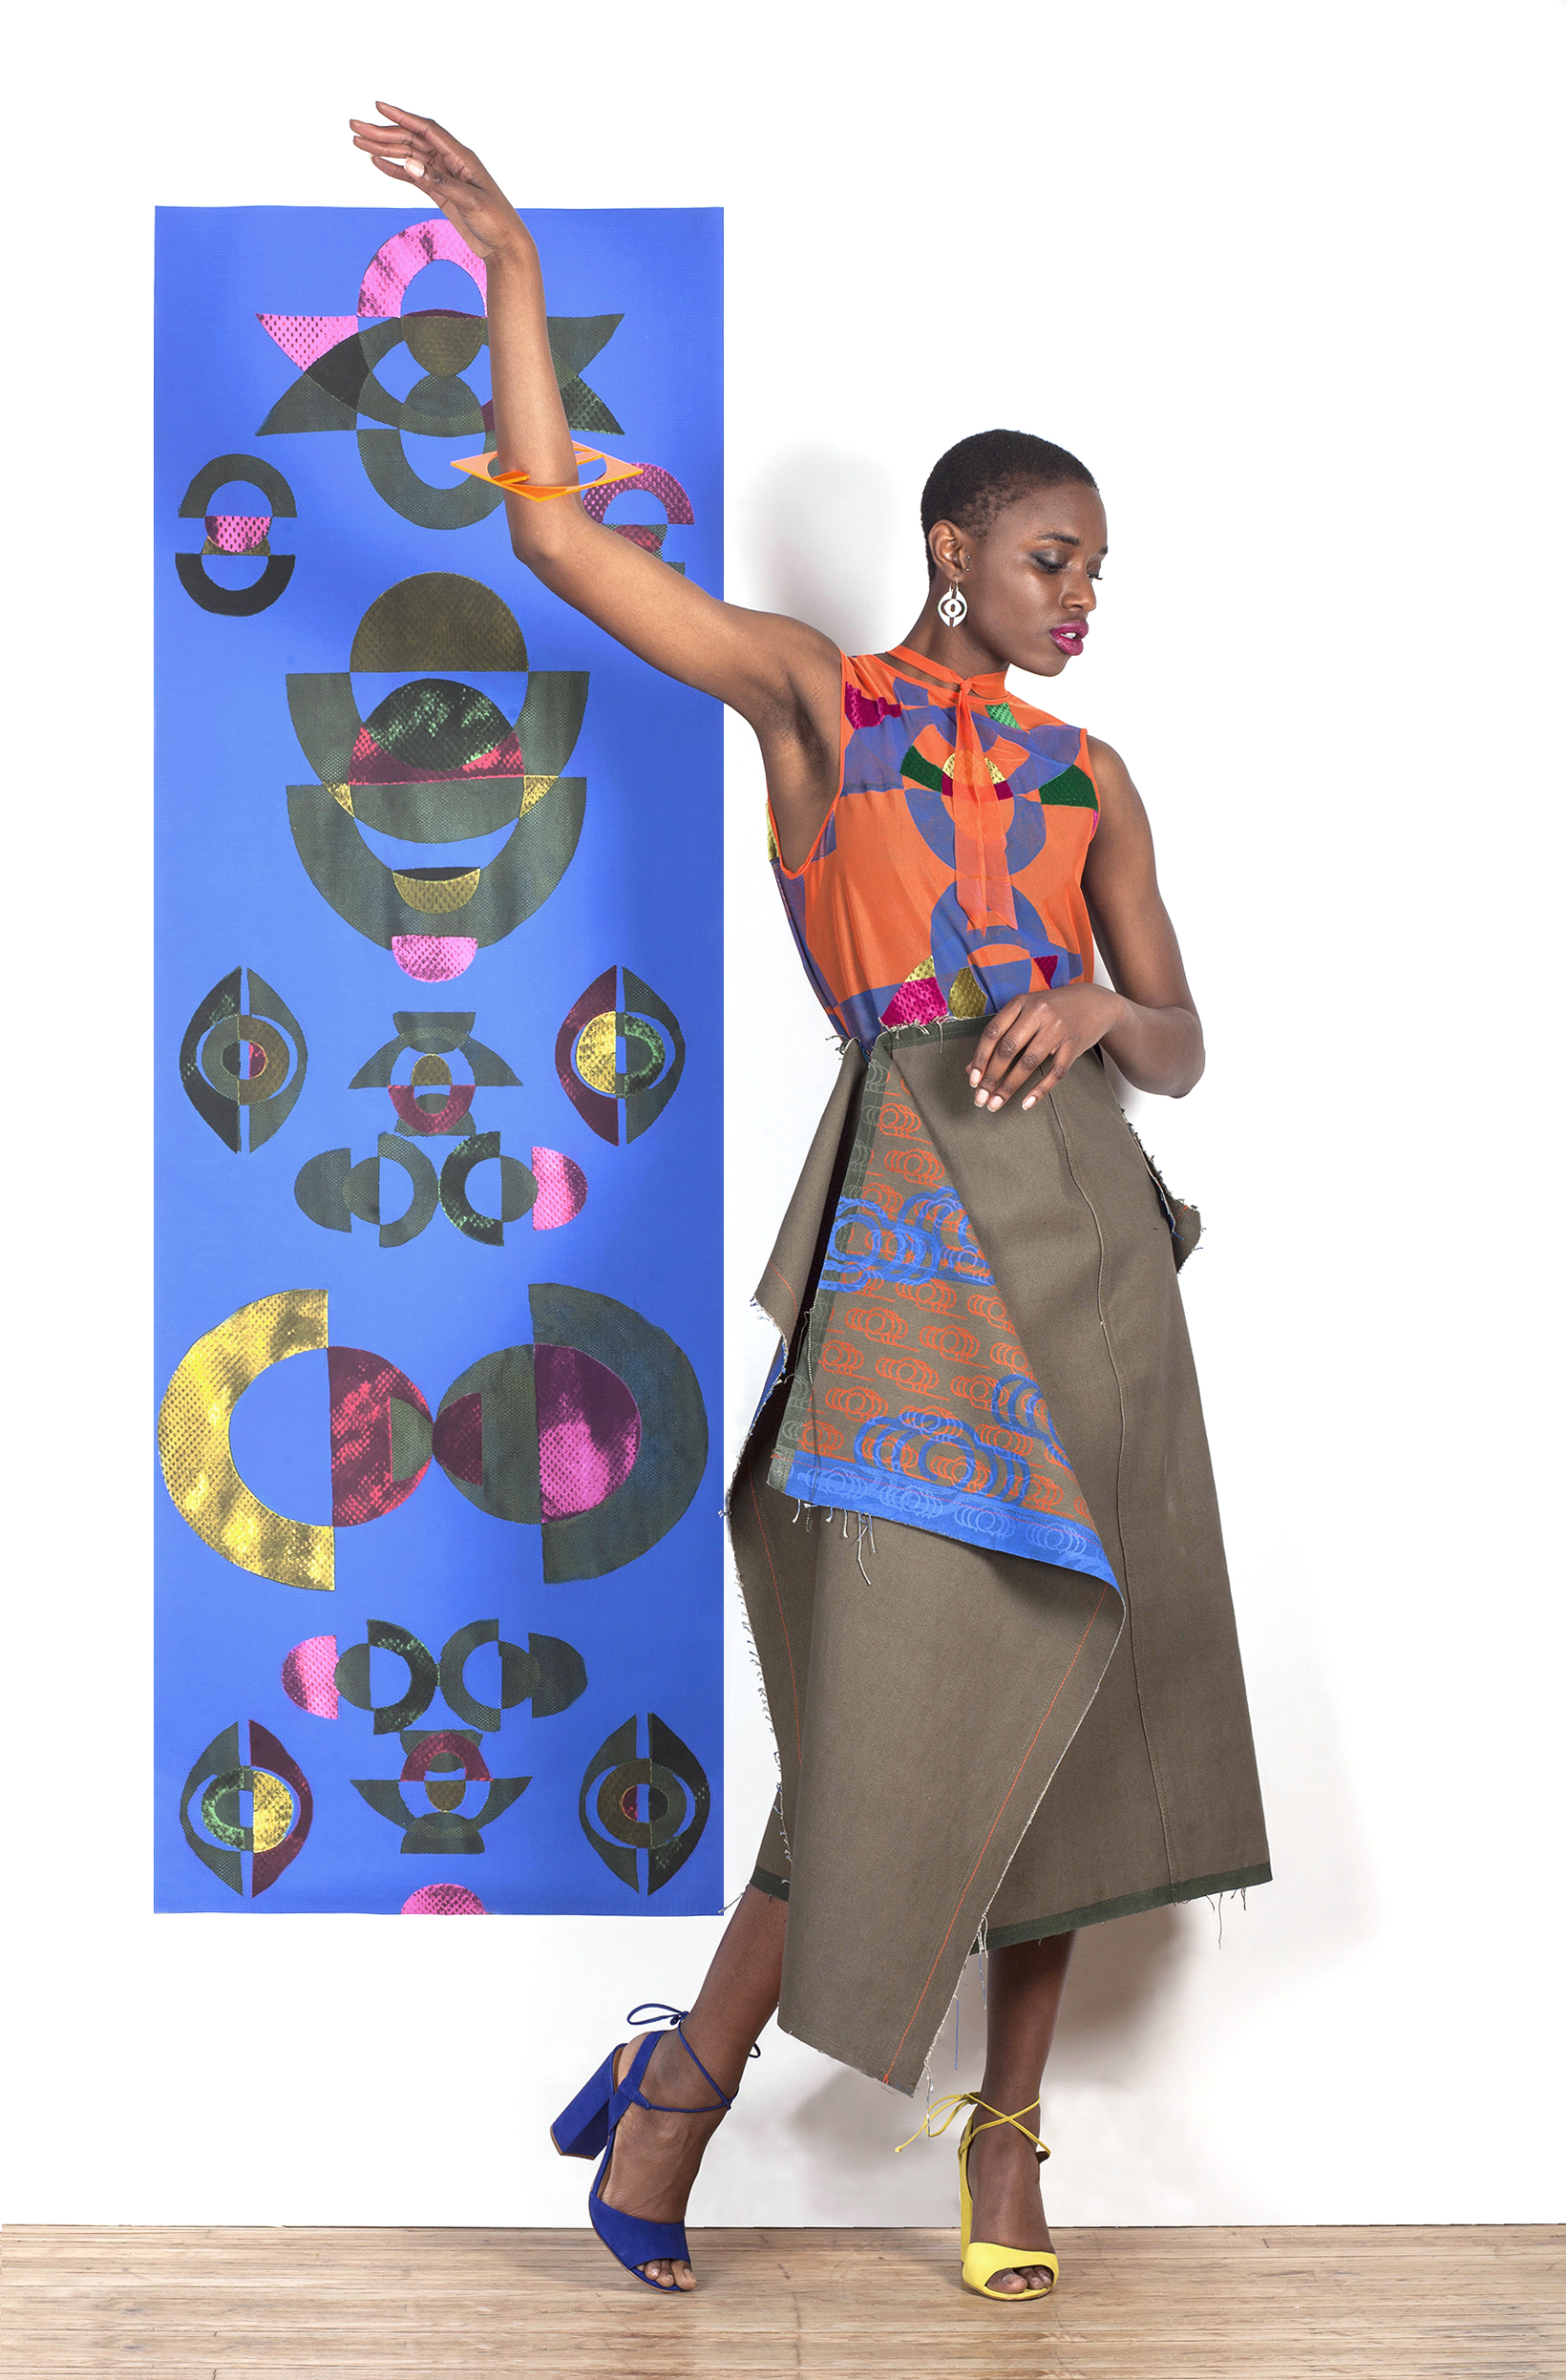  Block Printed and Velvet Appliqué Mesh Dress under a Block and Screen Printed Canvas Skirt with Laser Cut Earrings and Bracelett  